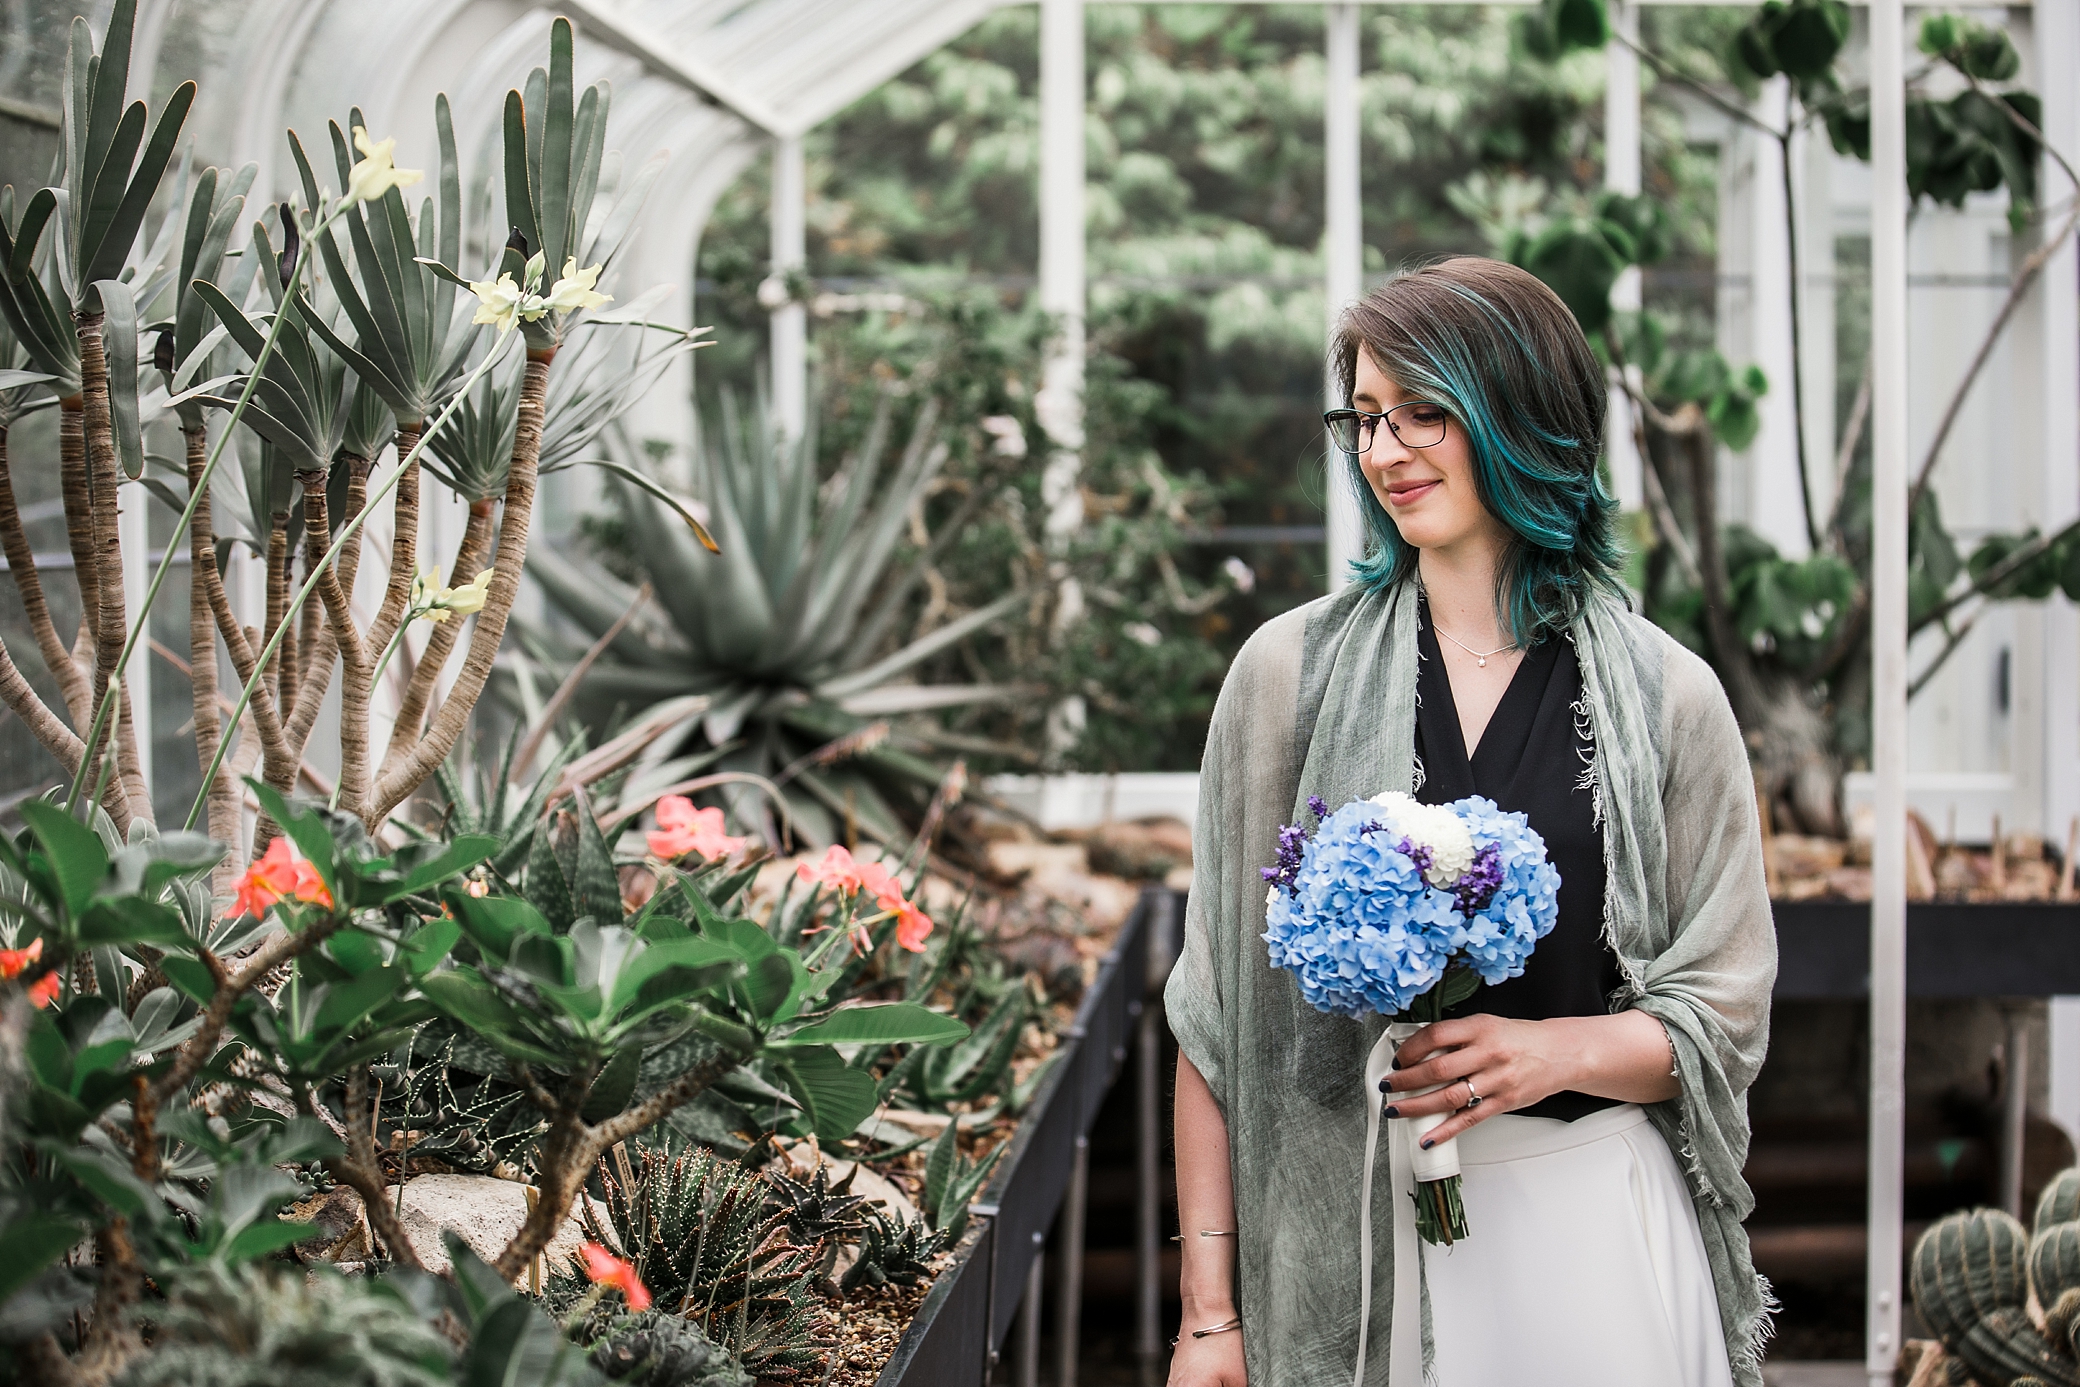 Bride before her intimate wedding ceremony at the Volunteer Park Conservatory | Megan Montalvo Photography